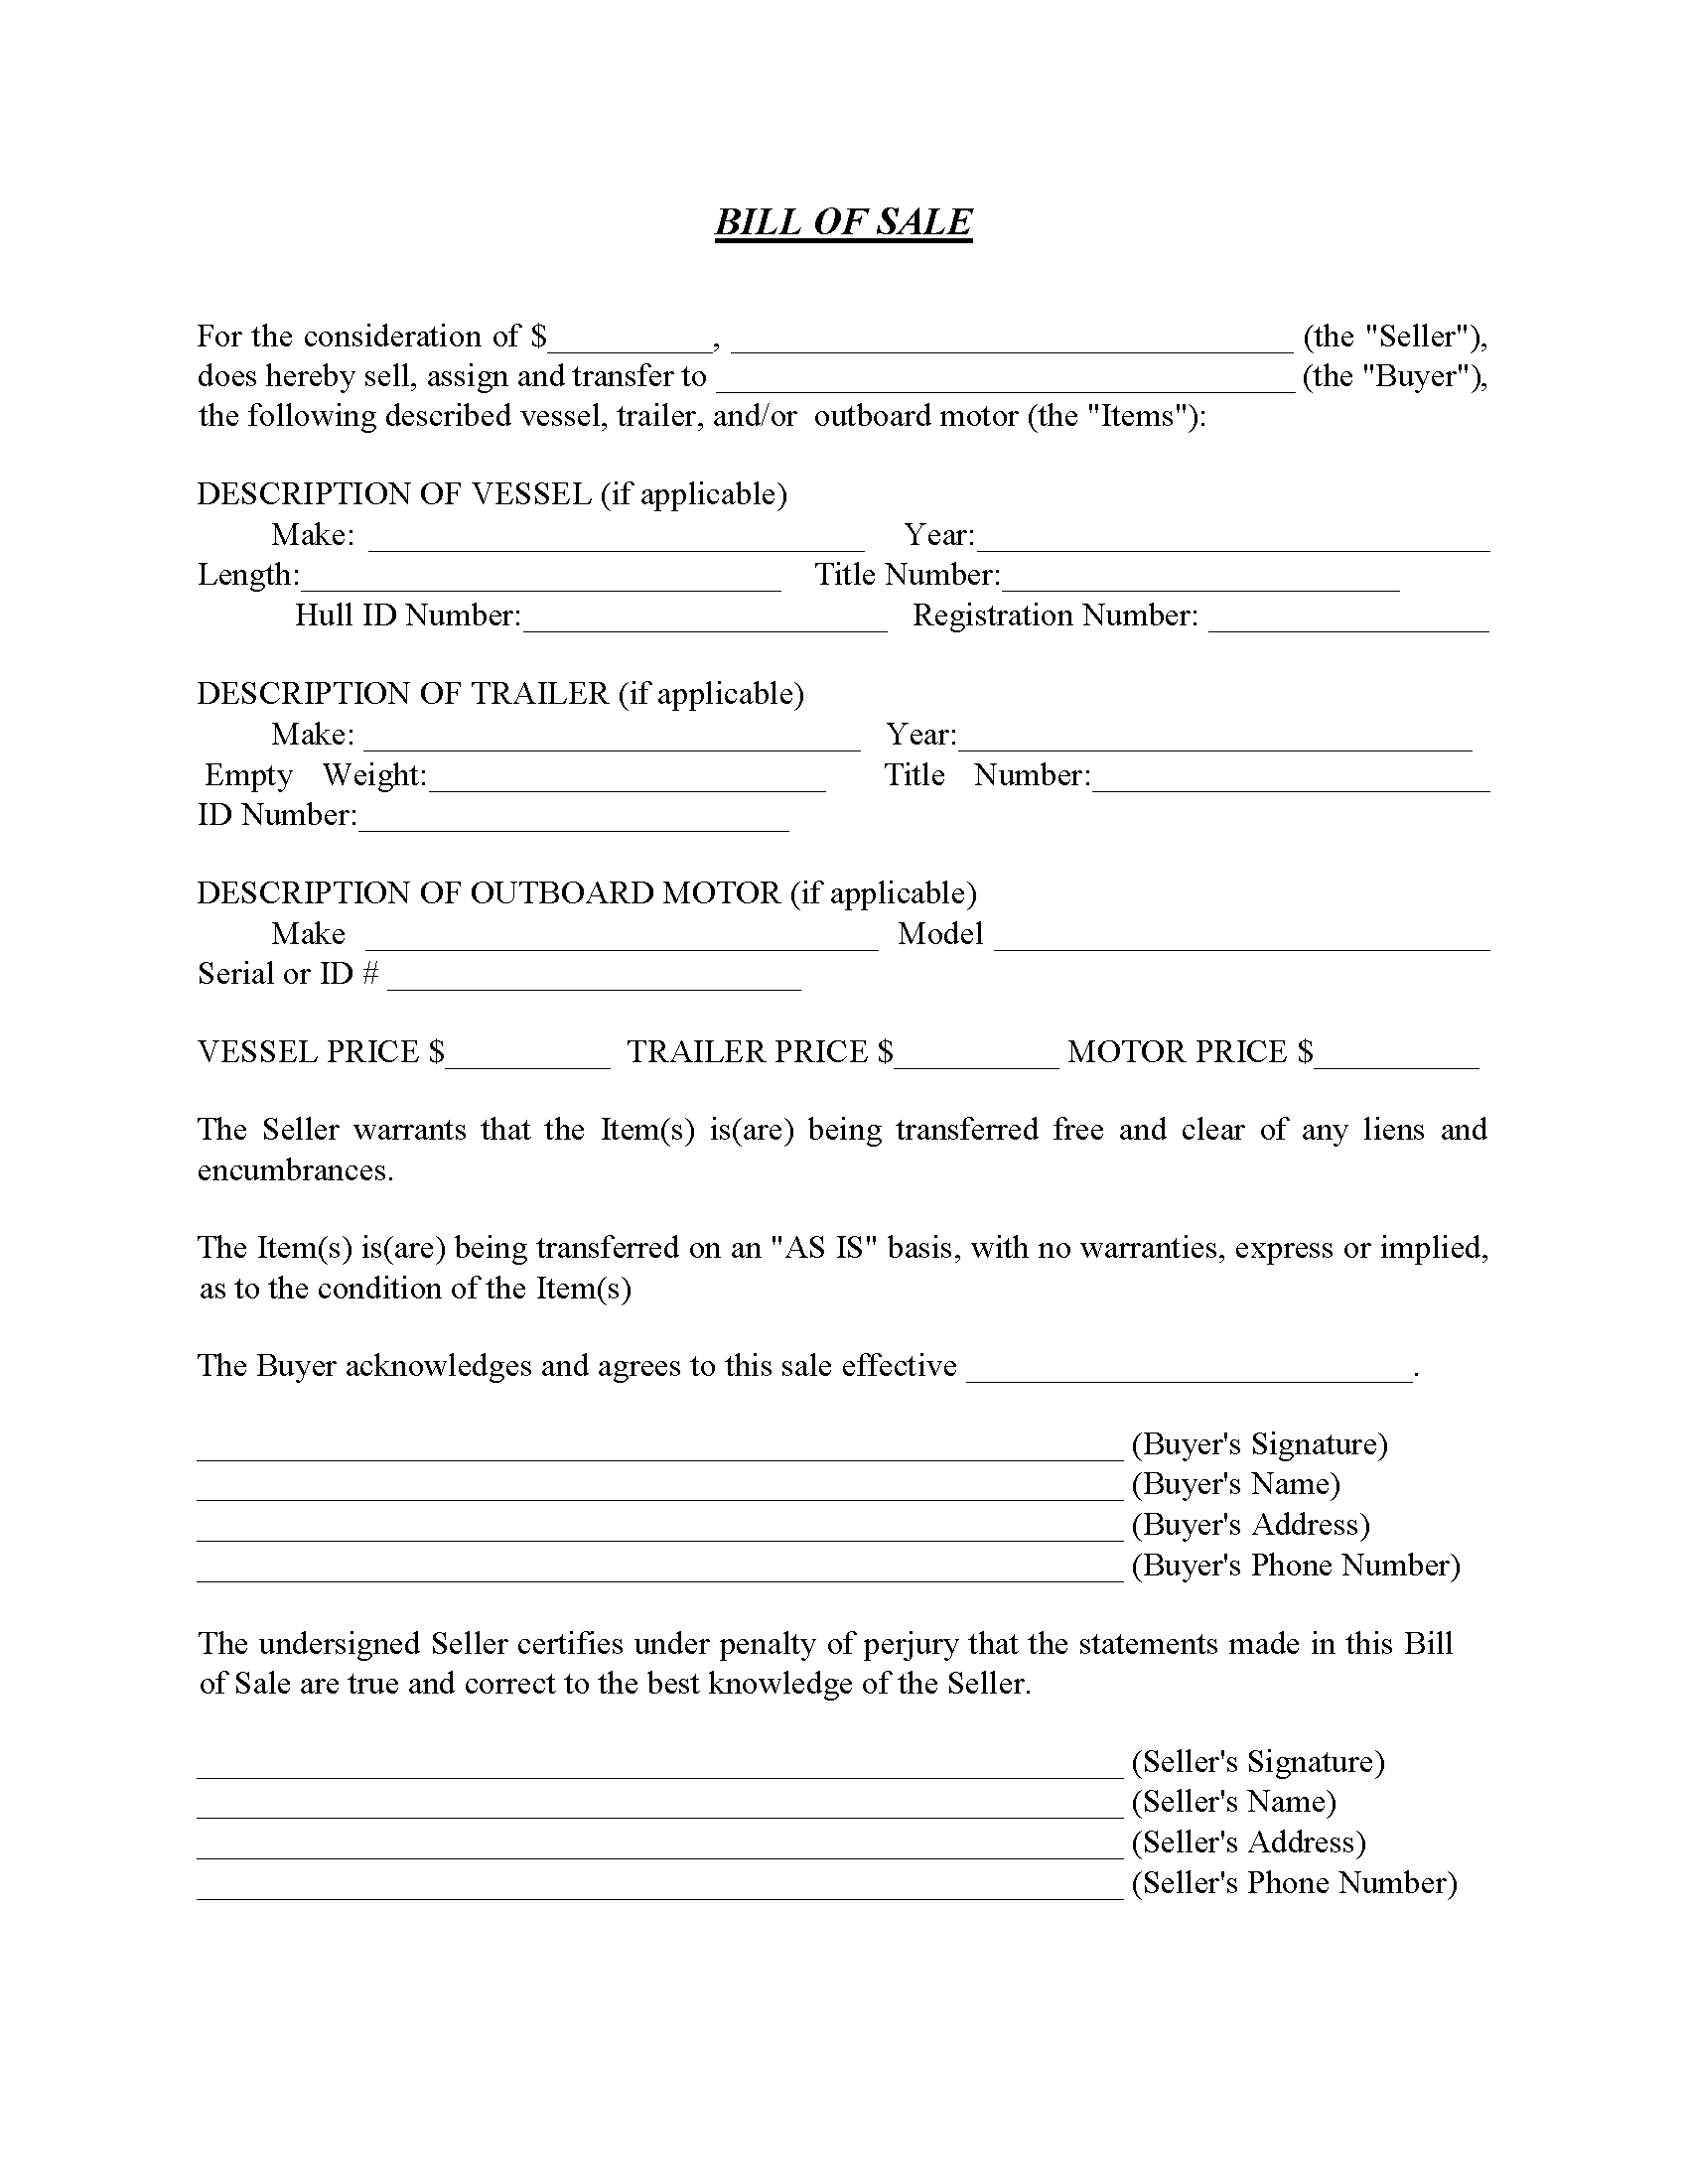 Alabama Boat Bill of Sale Form - Word - Free Printable Legal Forms